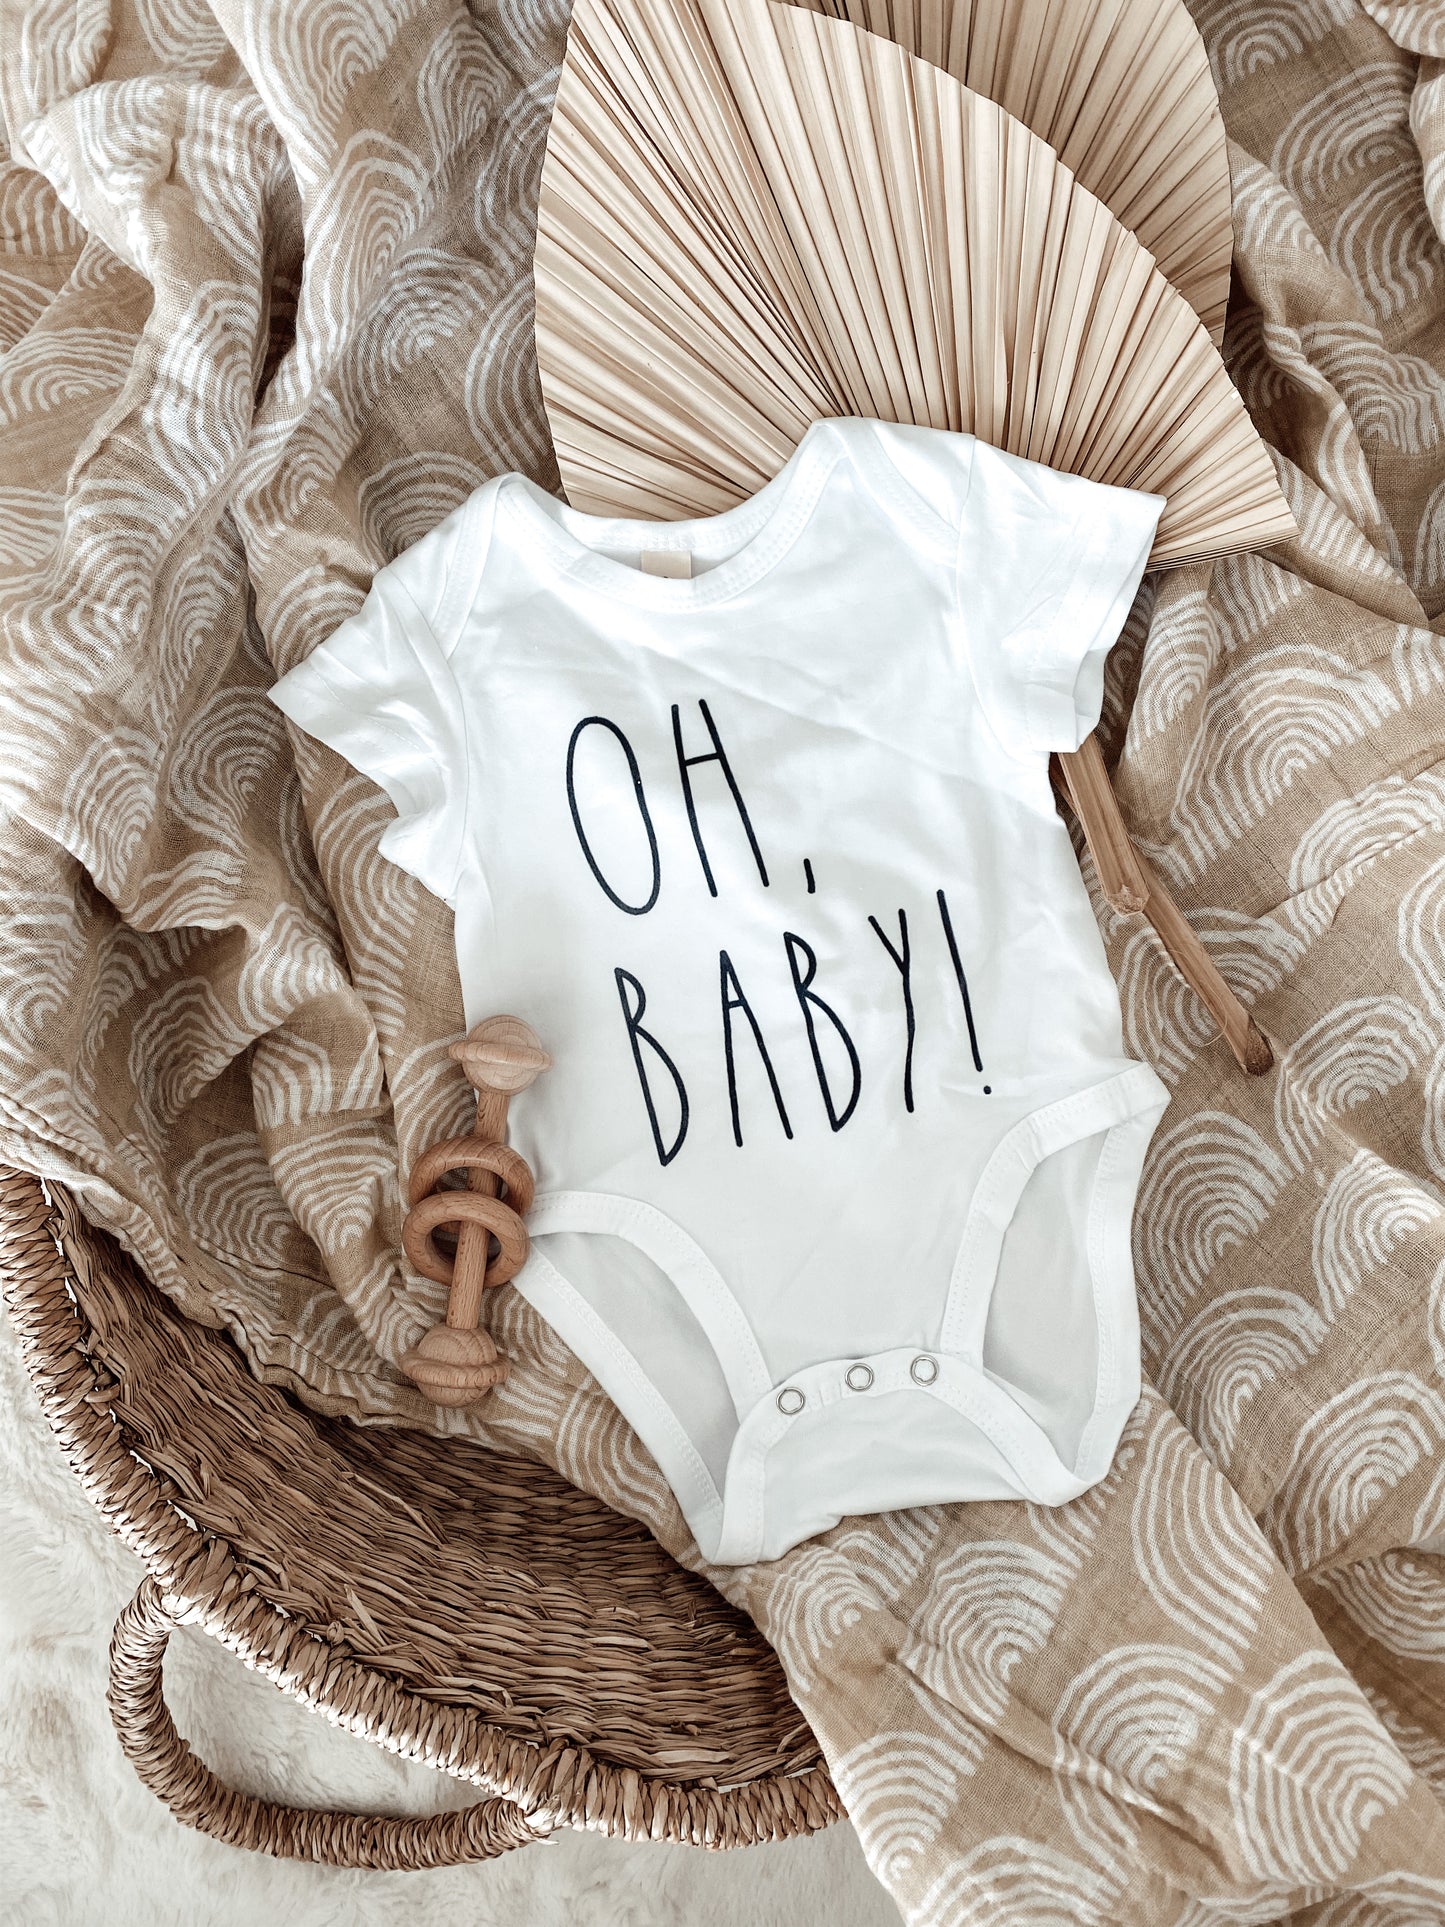 Oh Baby! - Pregnancy Announcement Romper